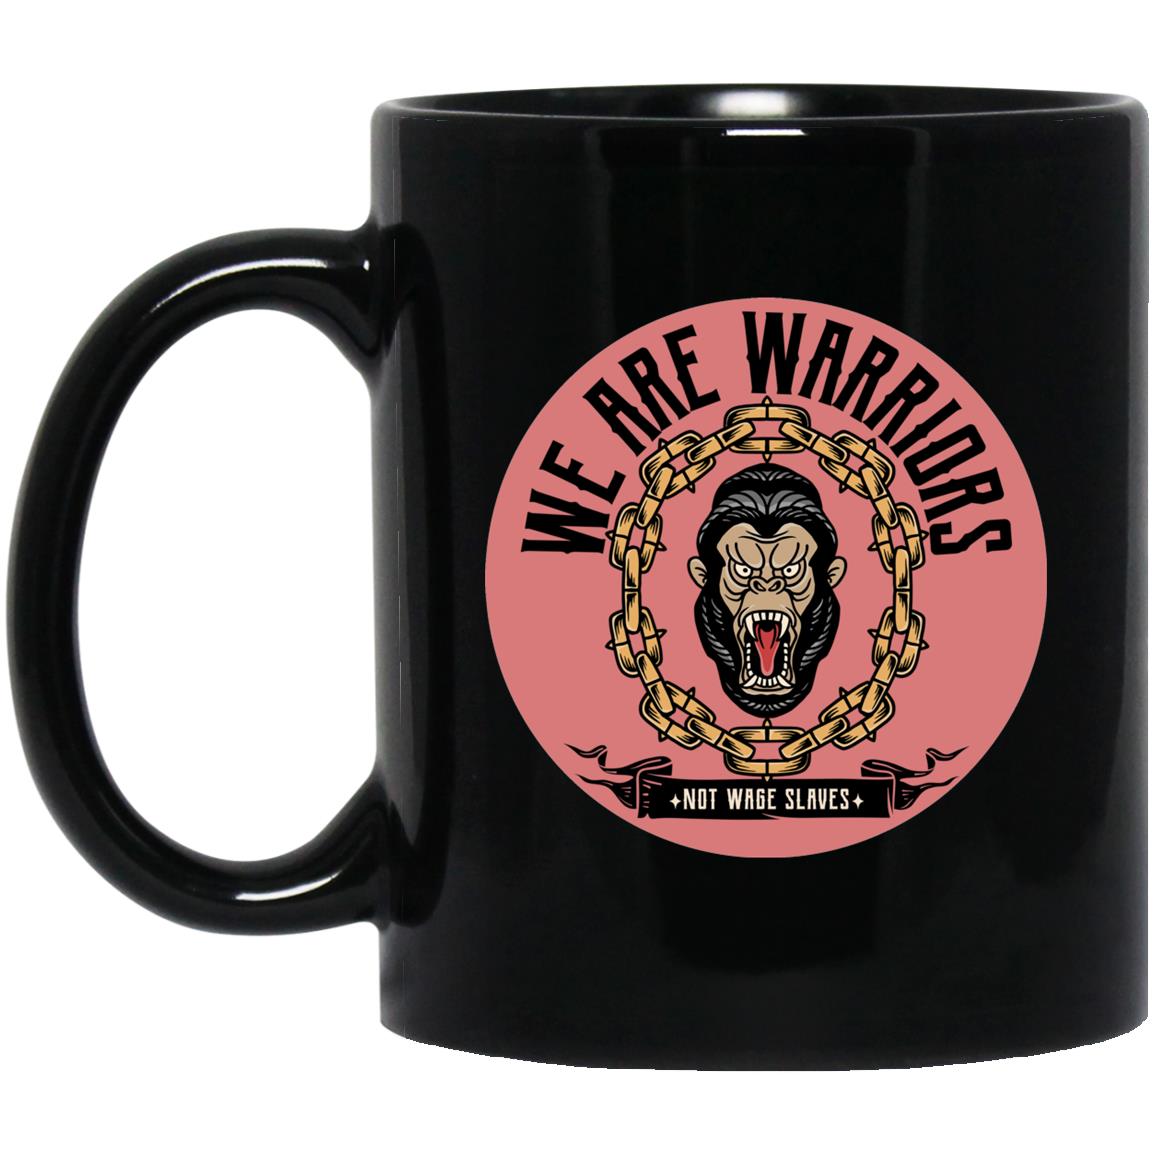 We Are Warriors - Cups Mugs Black, White & Color-Changing